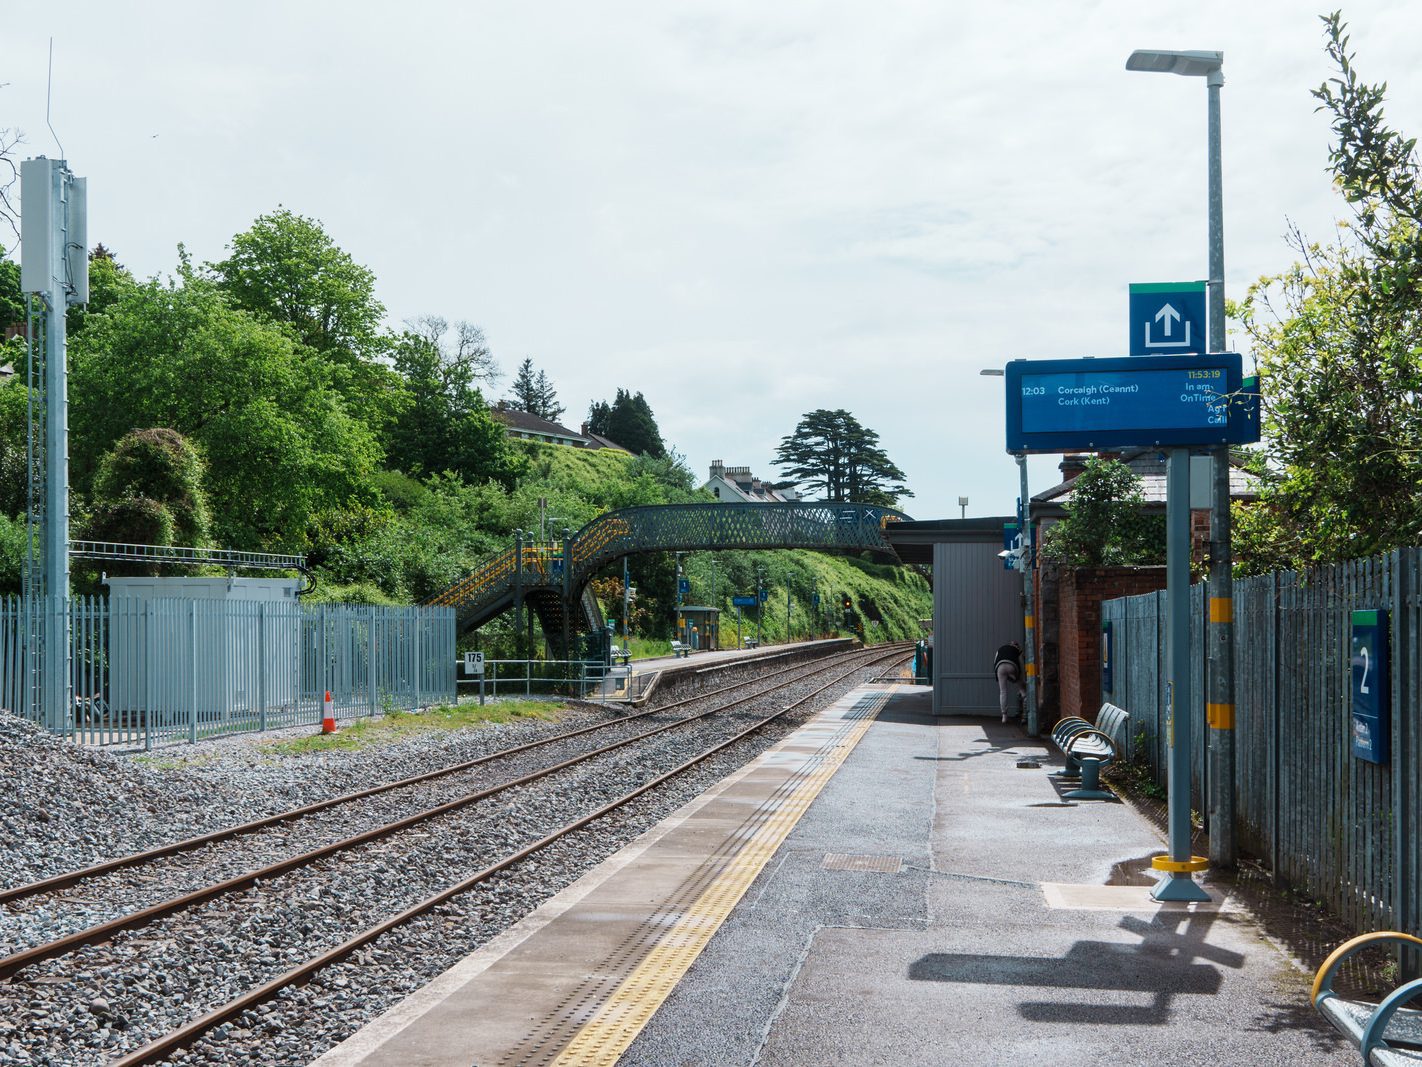 RAILWAY STATION AT RUSHBROOKE IN CORK [CORK TO COBH LINE] 006